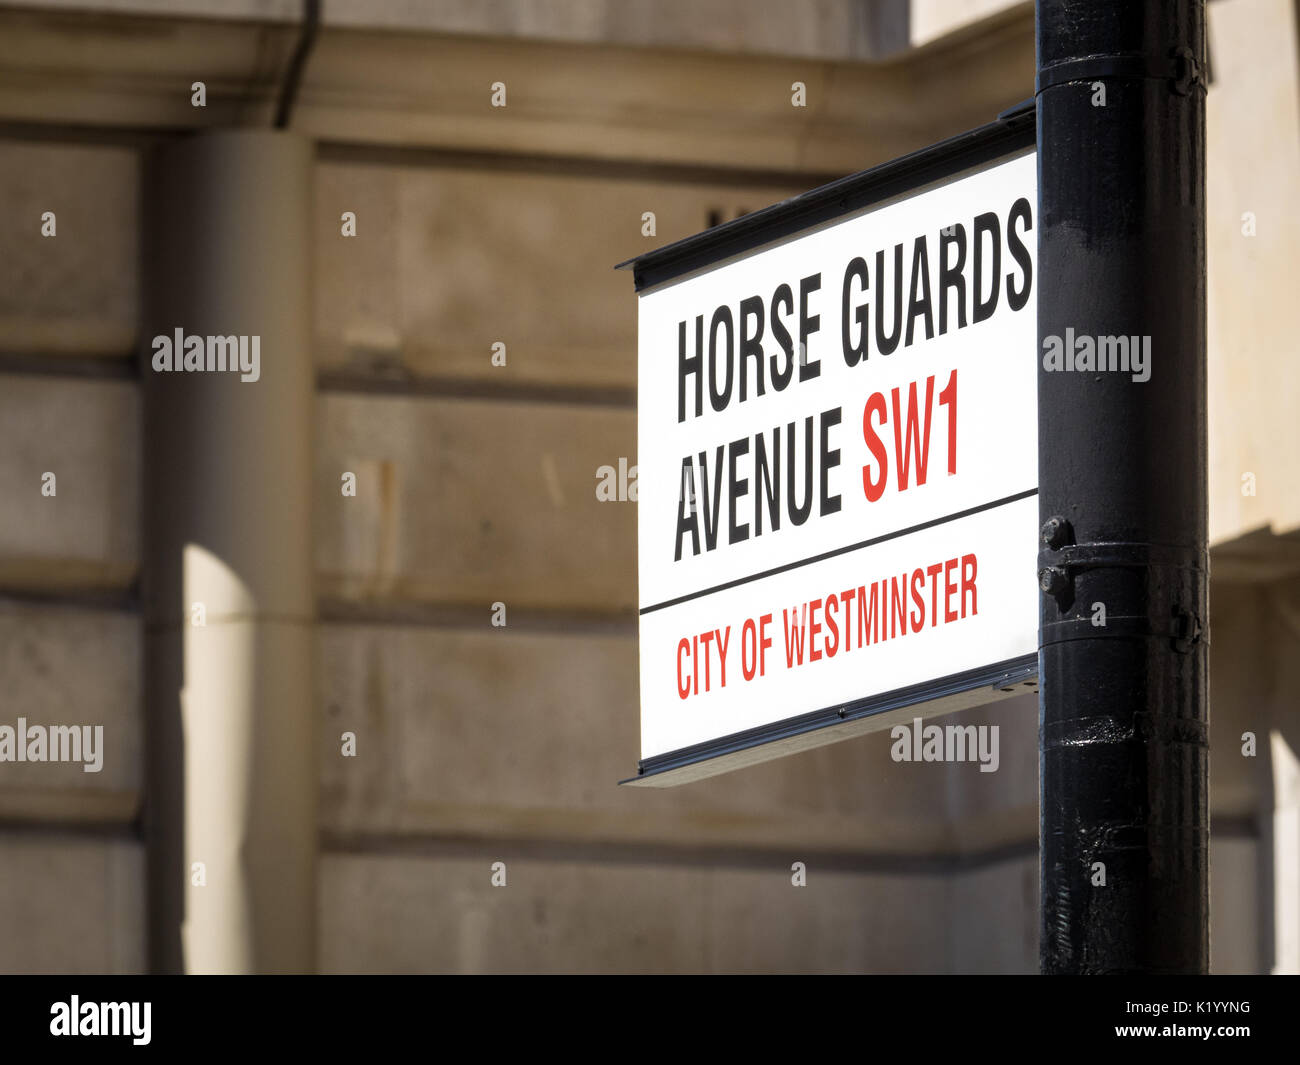 Horse Guards Avenue street sign in the Whitehall area of central London Stock Photo